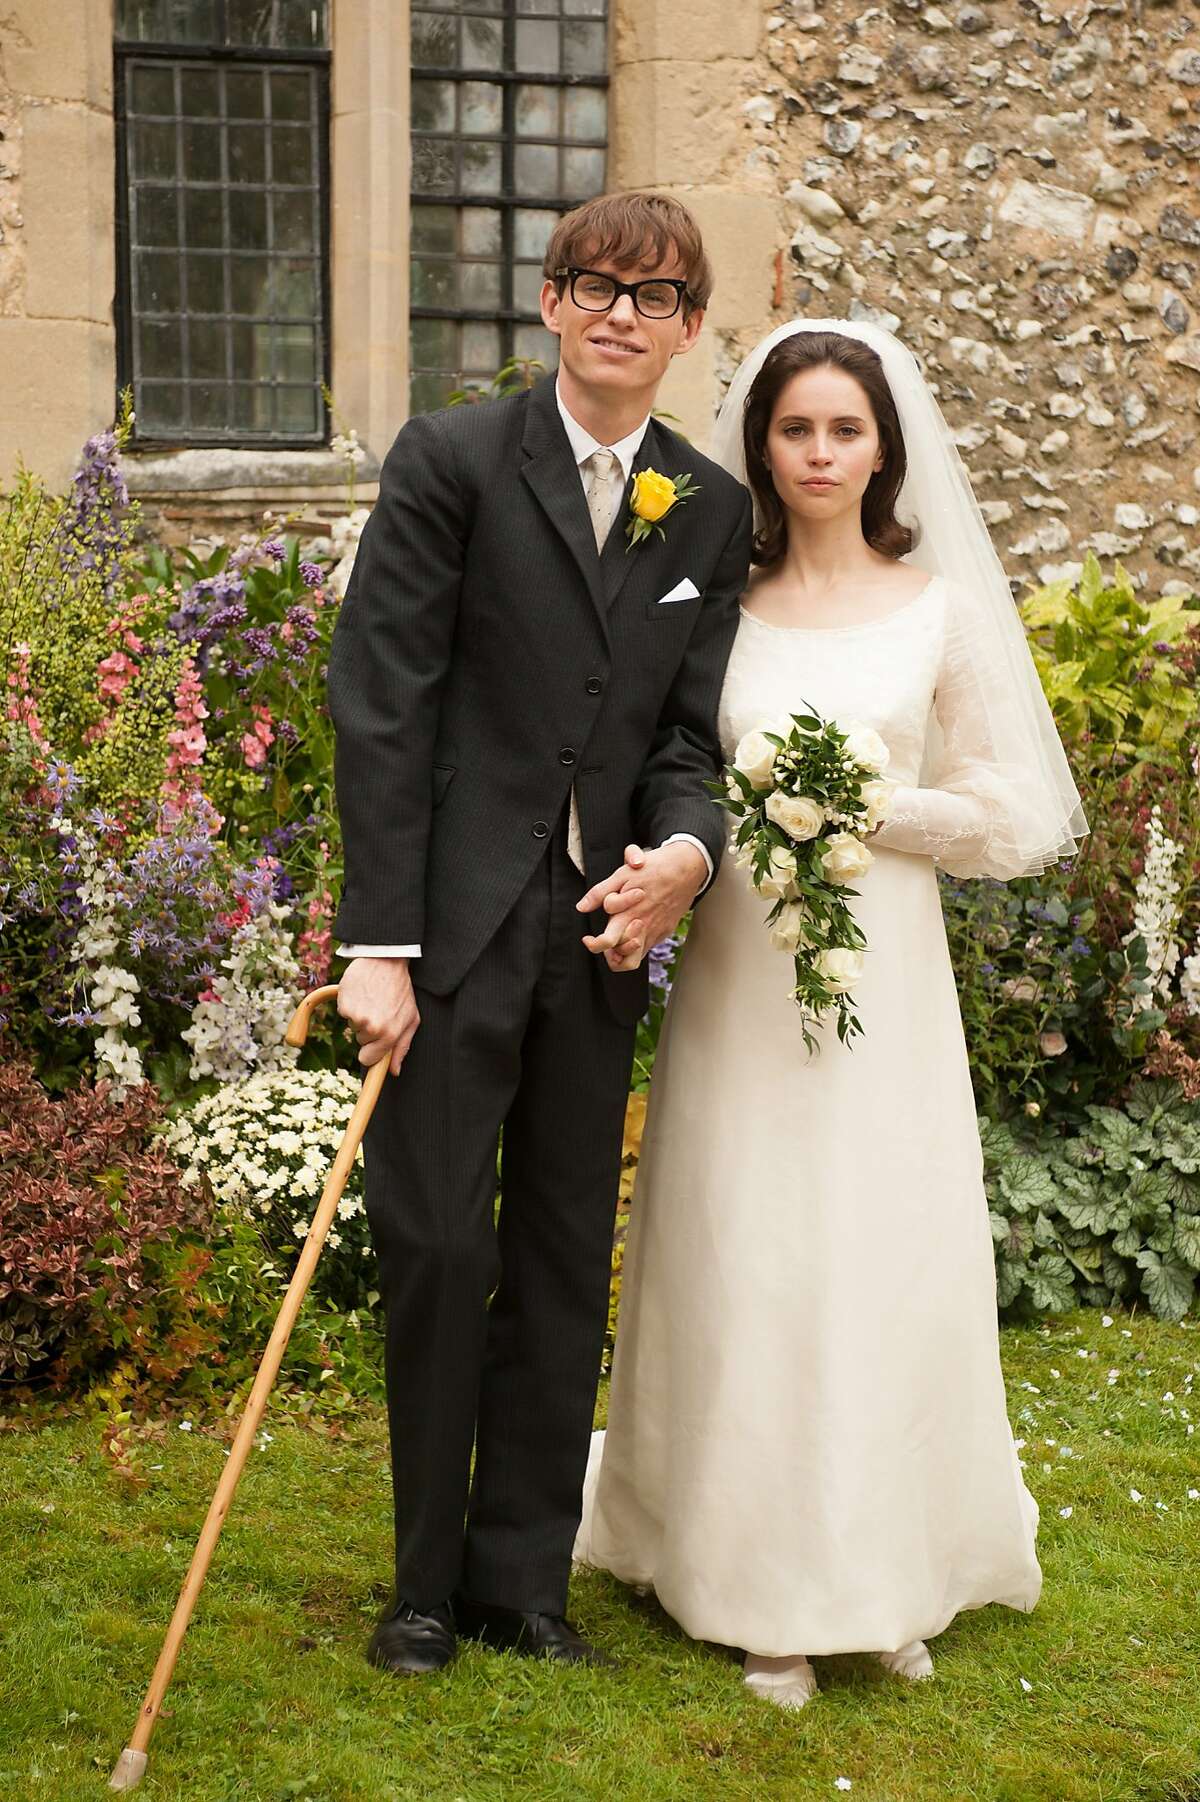 Eddie Redmayne stars as Stephen Hawking and Felicity Jones stars as Jane Wilde Academy Award winner James Marsh's "The Theory of Everything," a Focus Features release. (Liam Daniel/Focus Features/MCT)